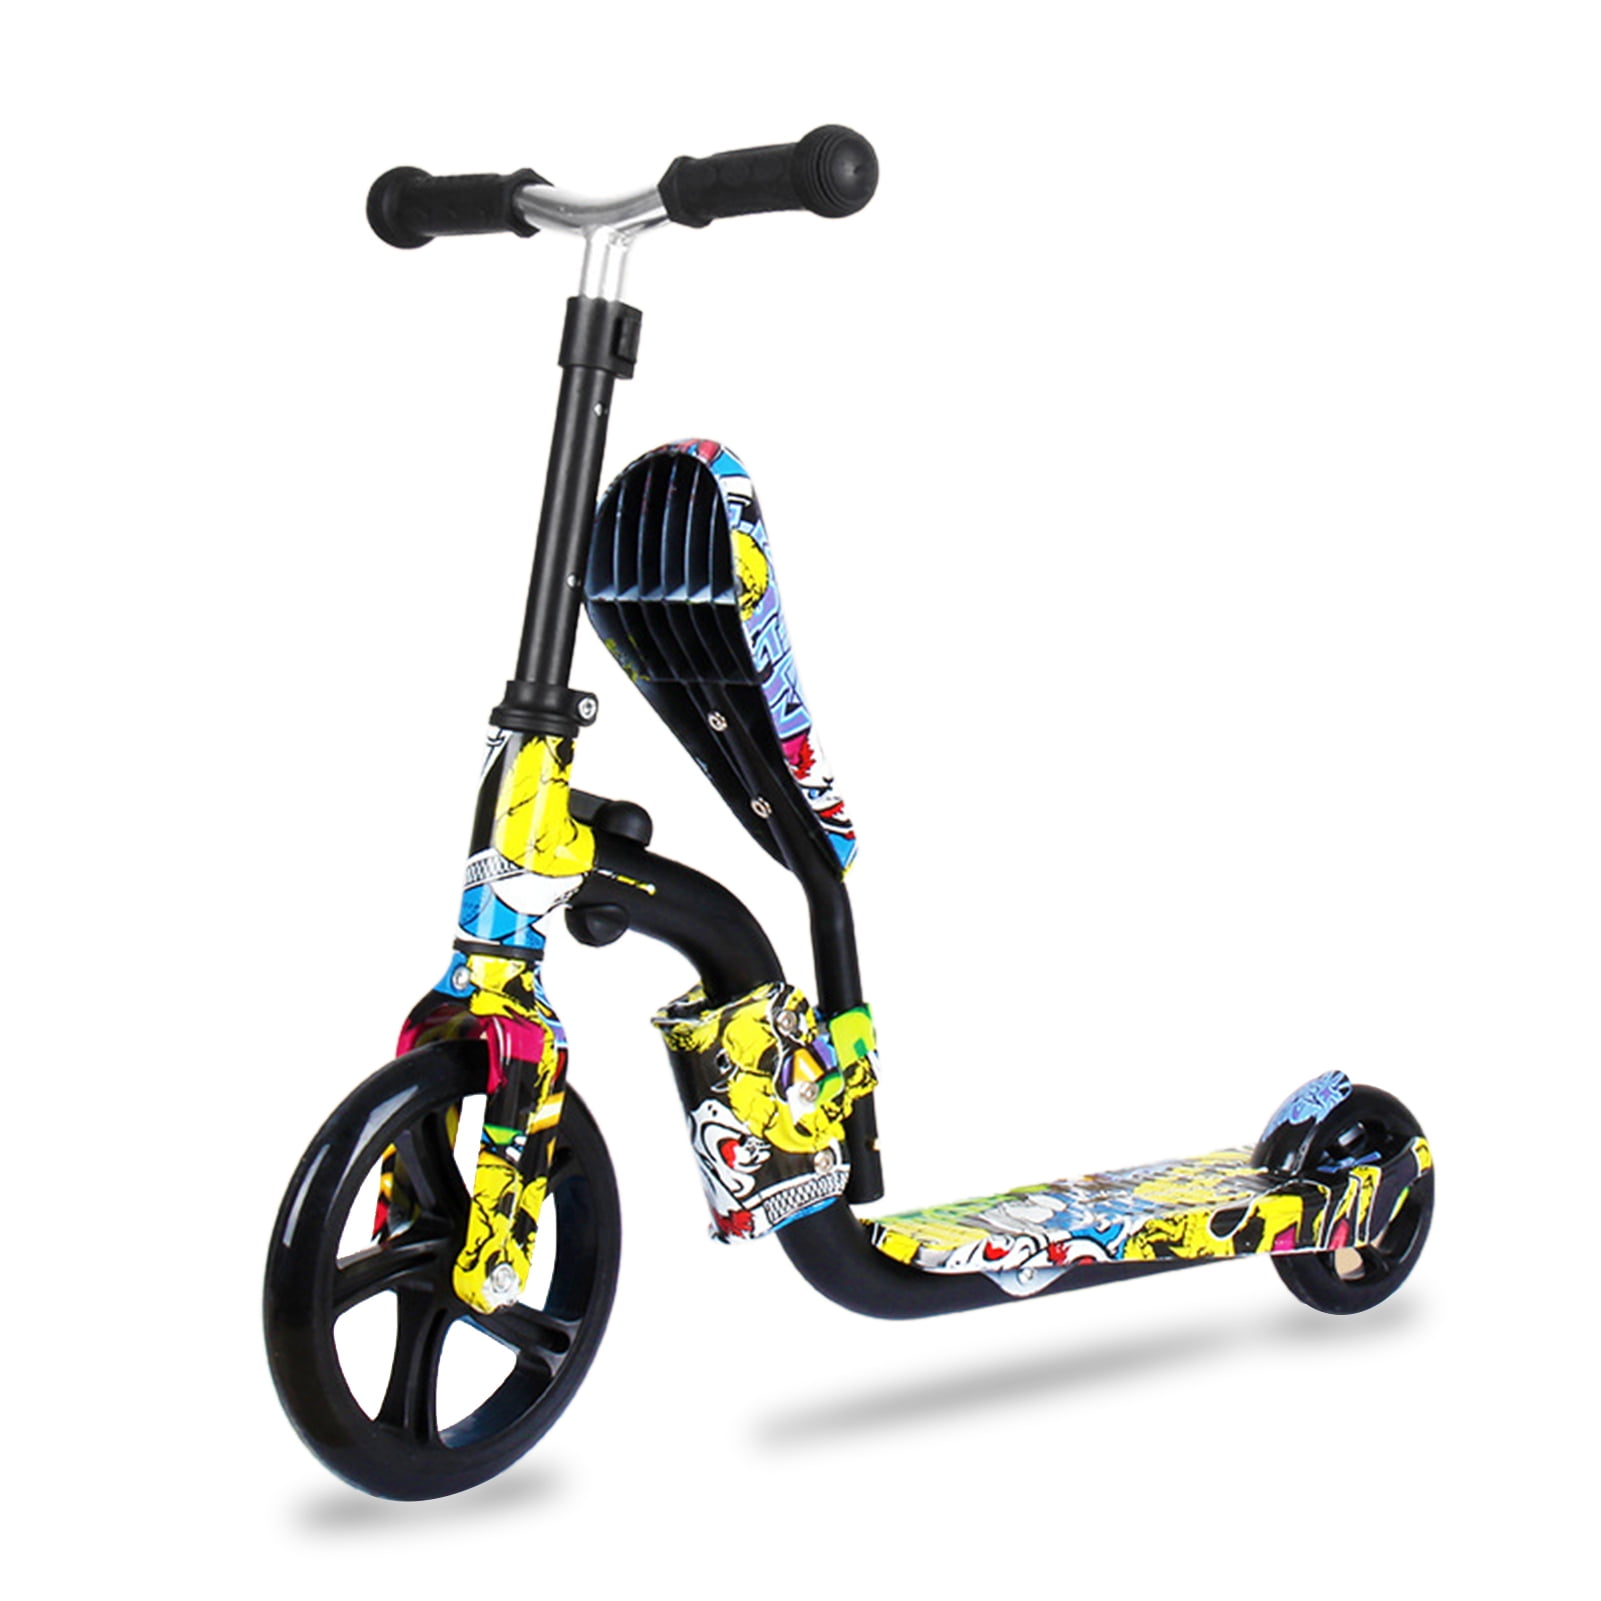 2-in-1 Kick Scooter With Seat Great for Kids & Toddlers Girls Adjustable Height 